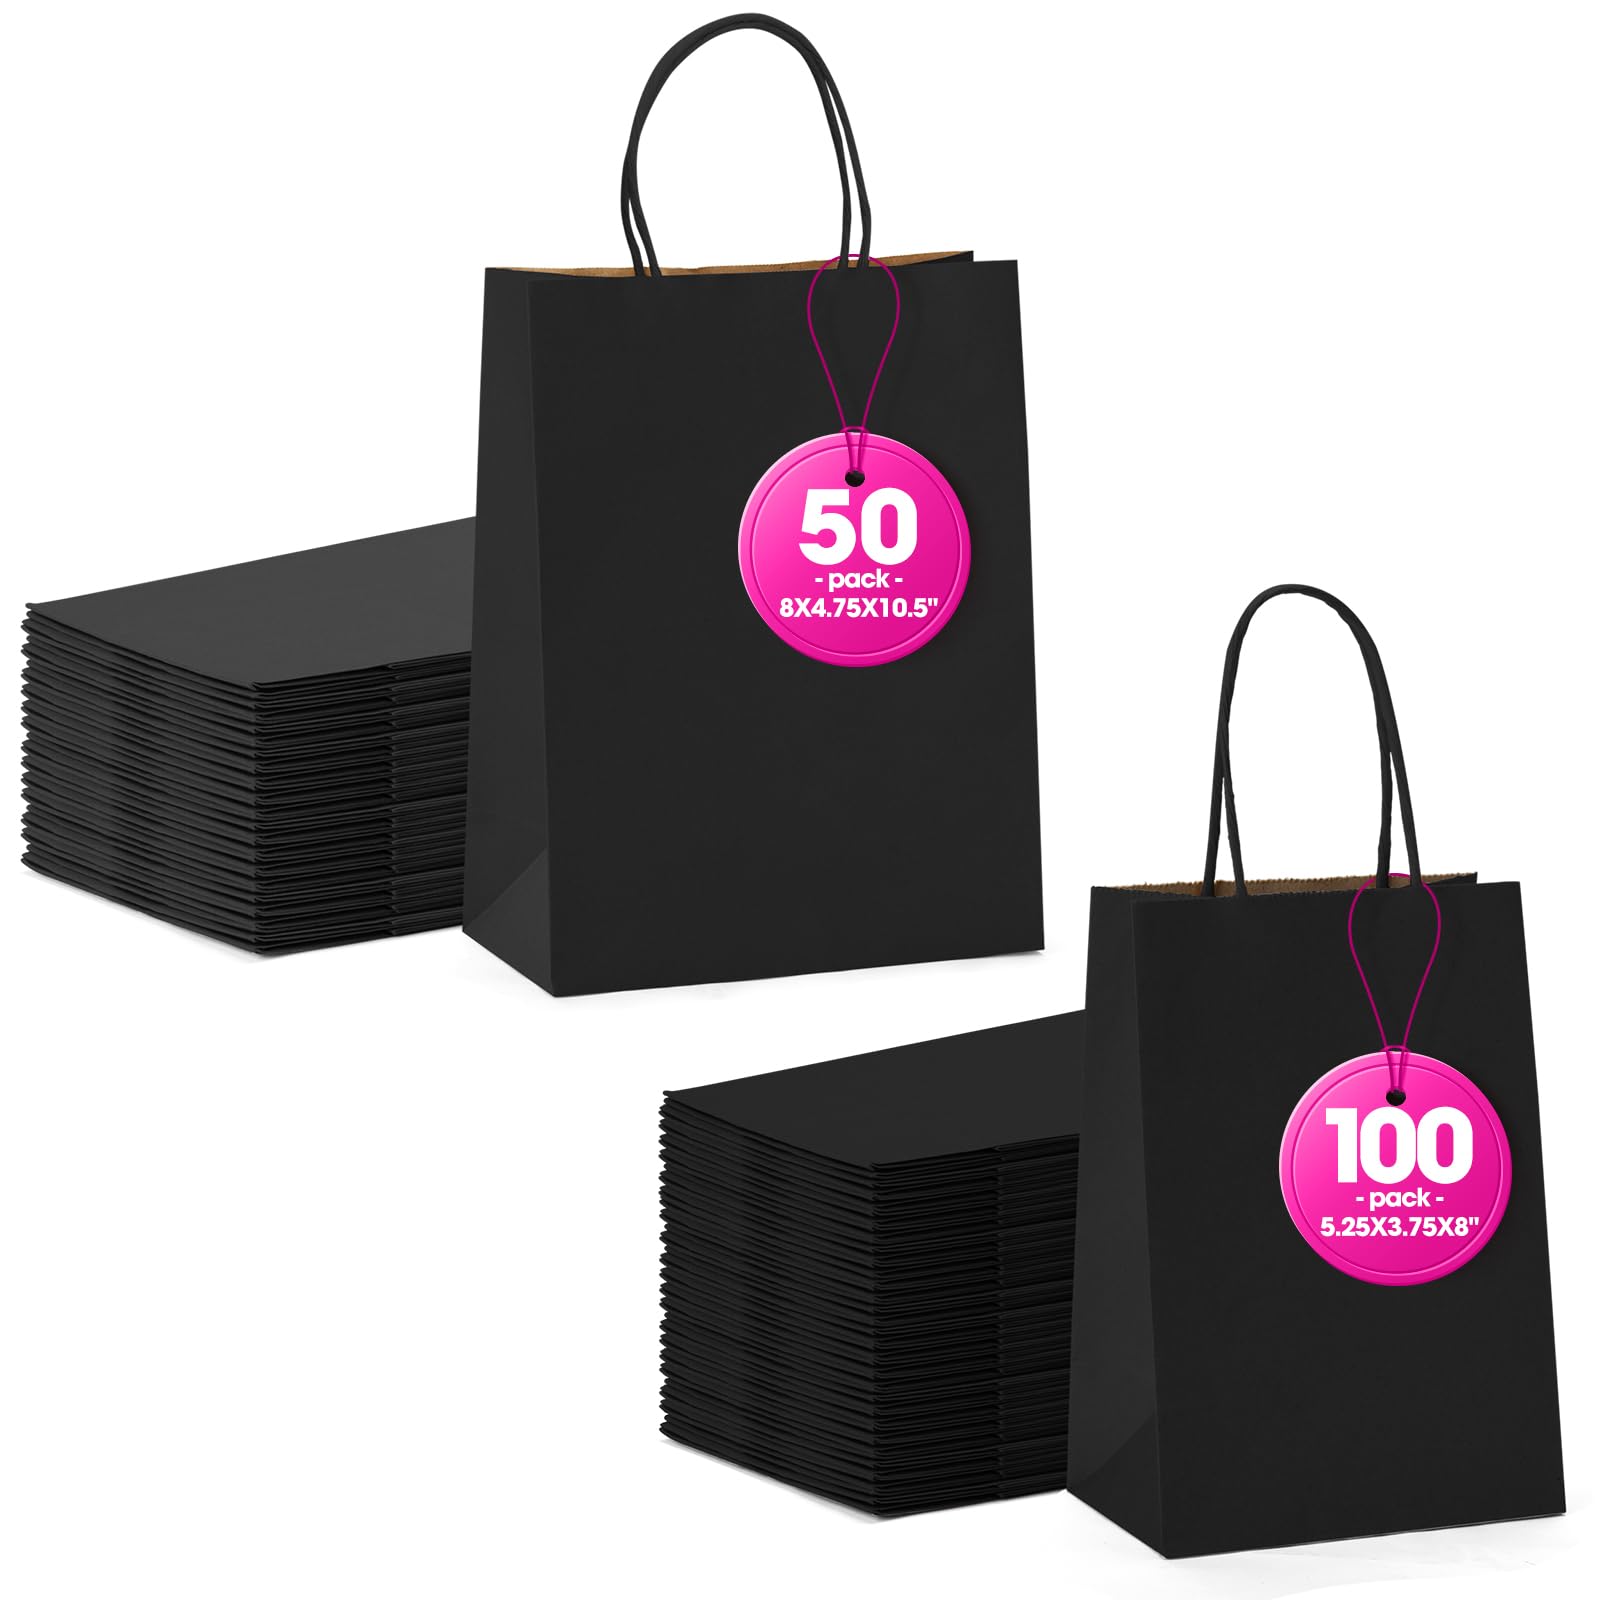 MESHA Black Gift Bags 5.25x3.75x8 Inches 100Pcs & 8x4.75x10.5 Inches 50Pcs Kraft Paper Bags with Handles Small Shopping Bags,Wedding Party Favor Bags